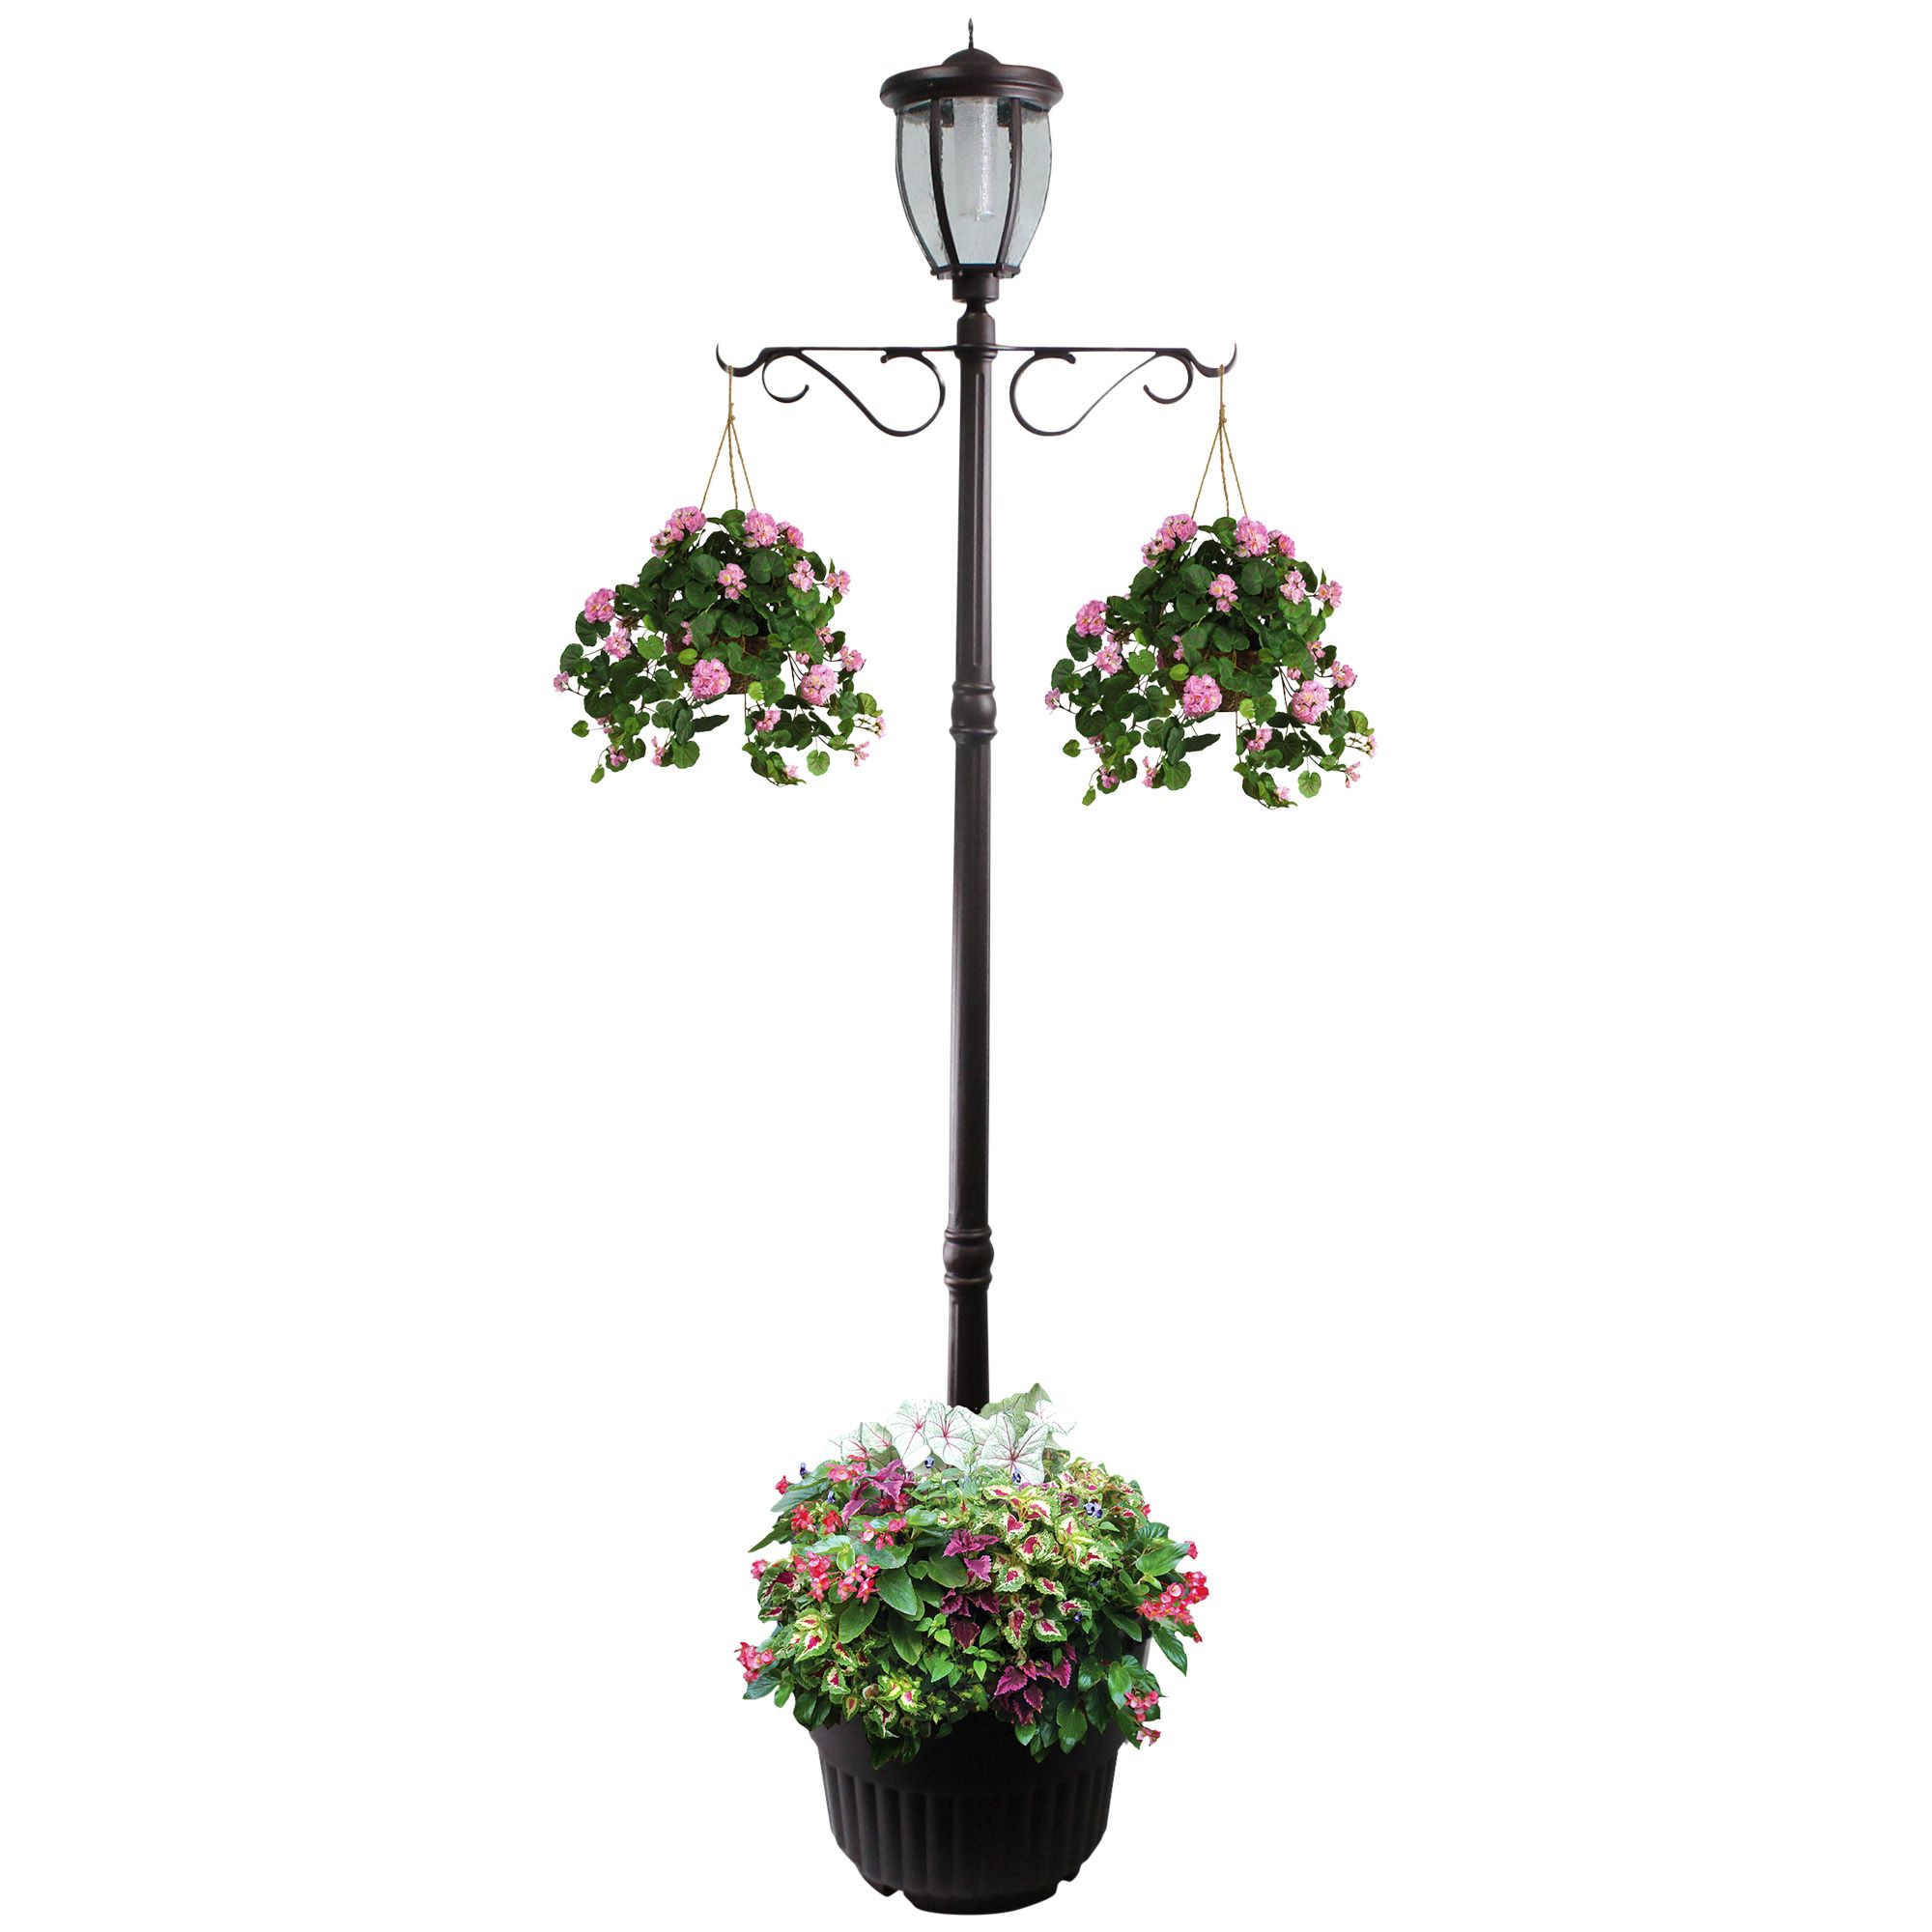 Sun Ray Kenwick Solar Lamp Post And Planter, Solar Lamp Post With Planter Base